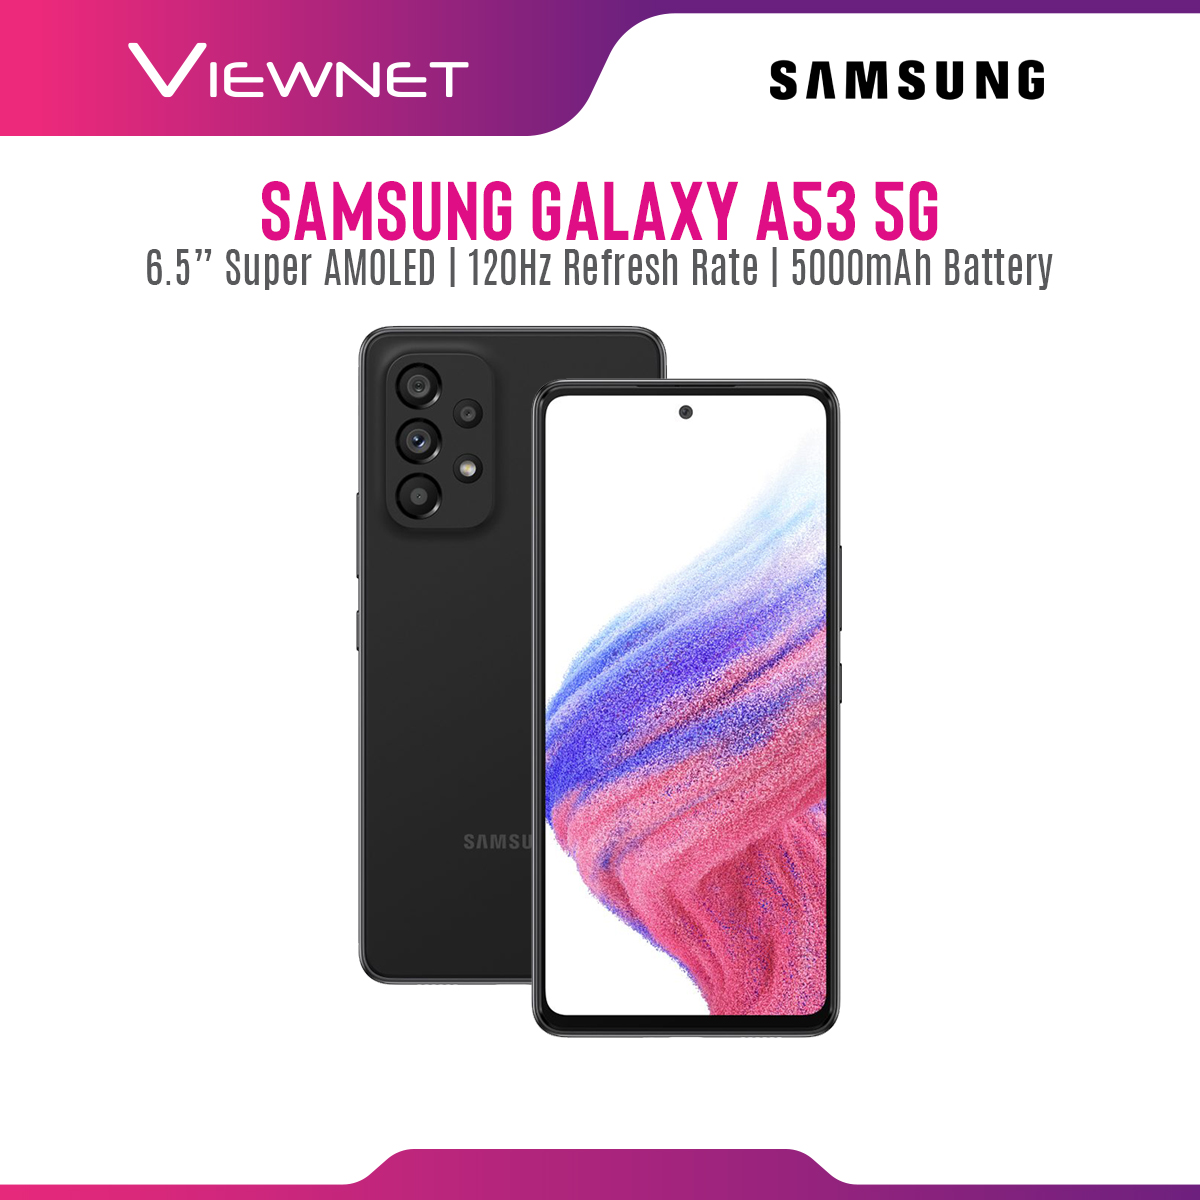 Samsung Galaxy A53 ( Black ) 5G Smartphone with 6.5" Super AMOLED Display, 120Hz Refresh Rate, Android 12, MicroSD Slot Up to 1TB, 5000 mAh Battery